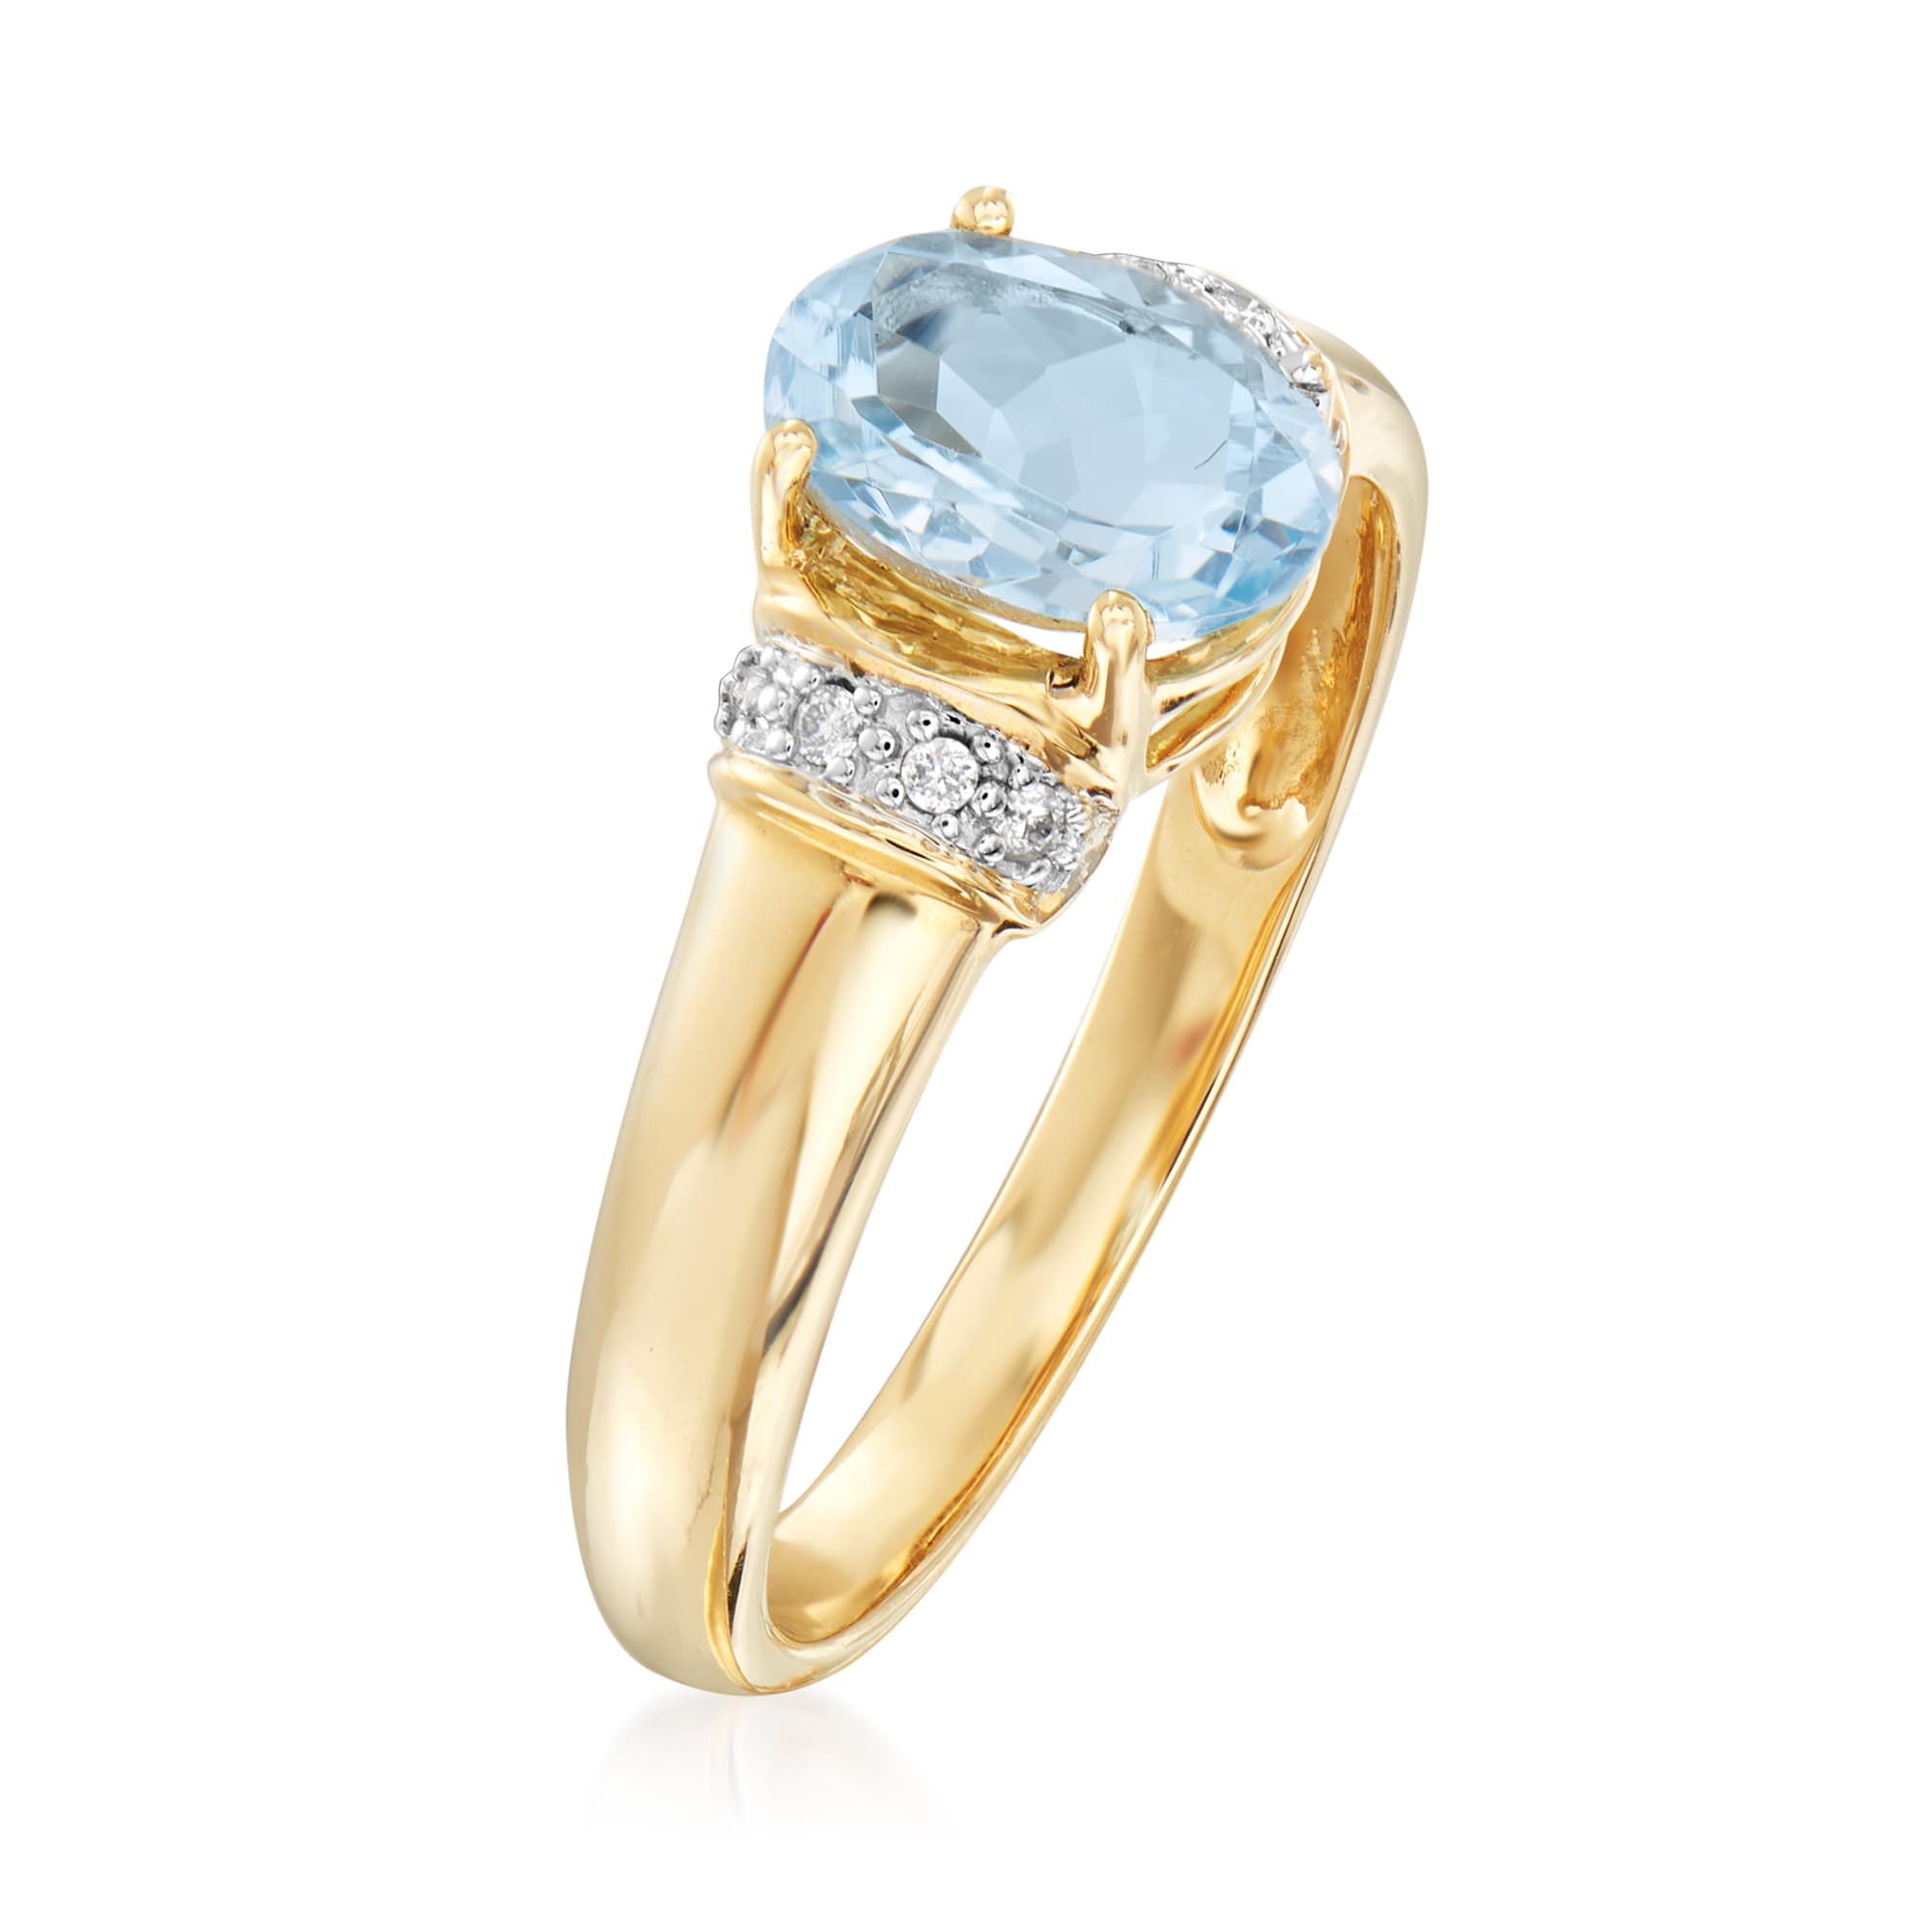 1.00 Carat Aquamarine Ring with Diamond Accents in 14kt Yellow Gold ...